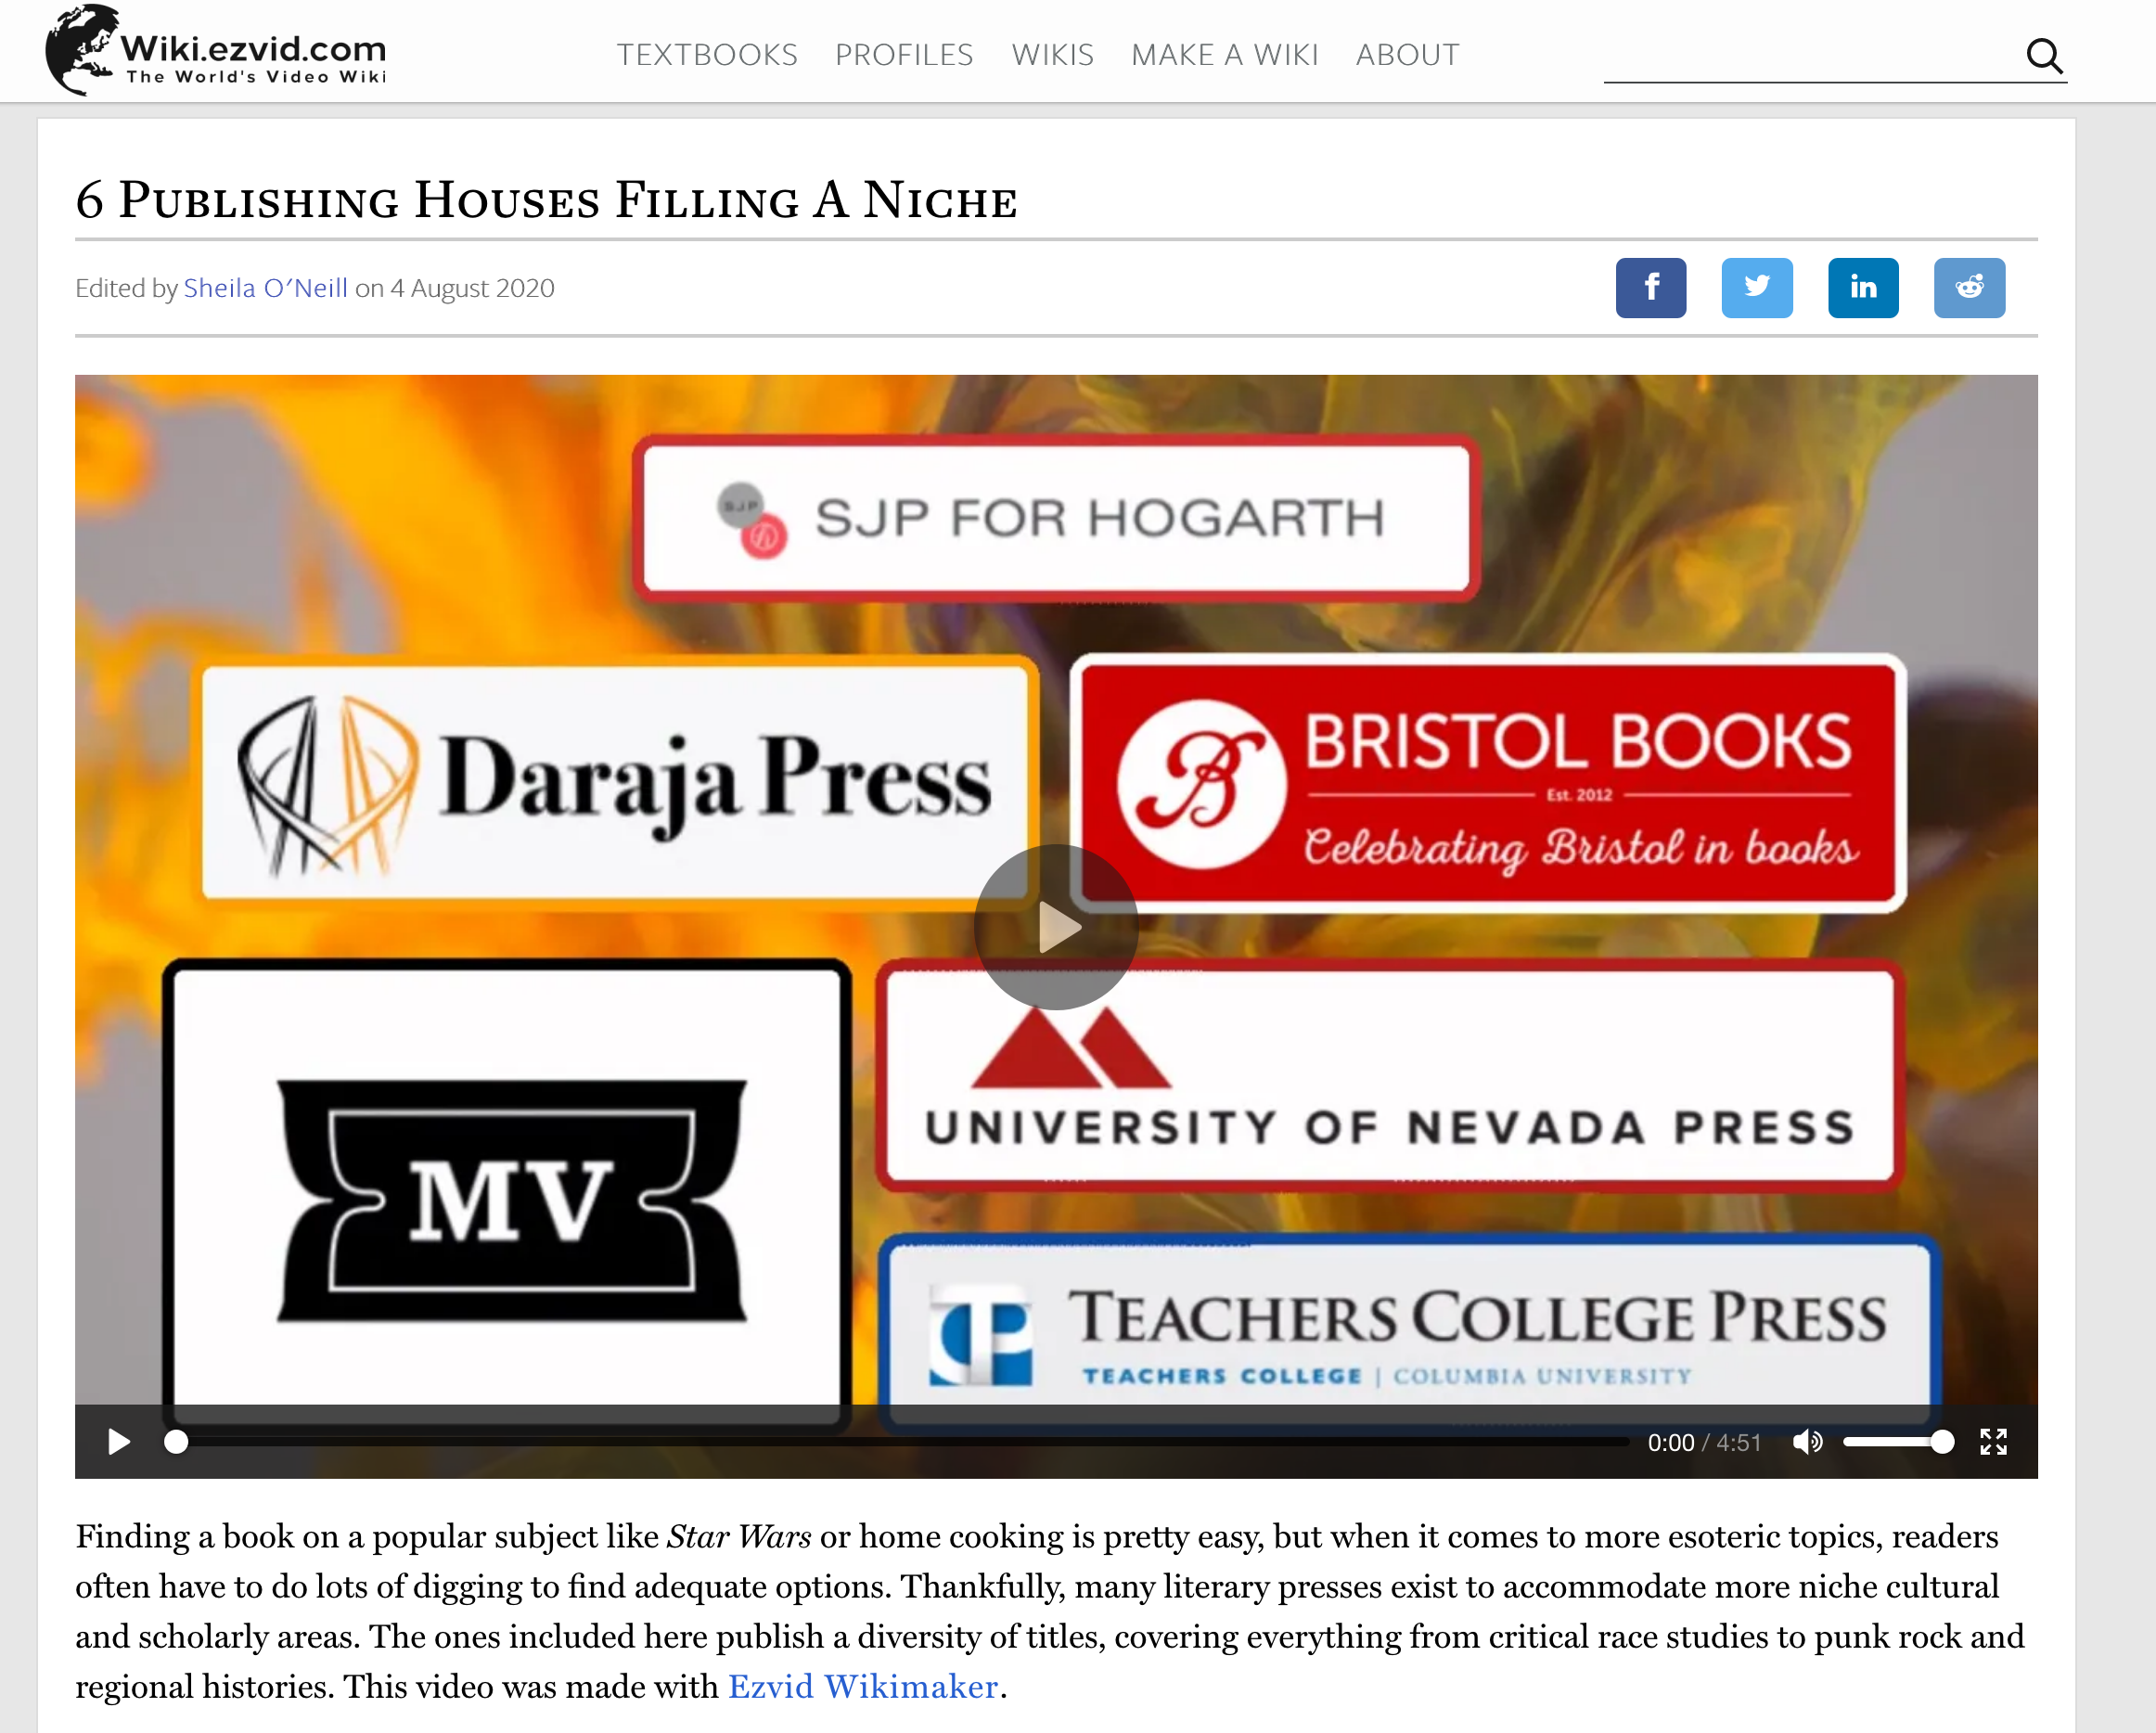 Daraja Press selected as “Publishing House Filling A Niche”